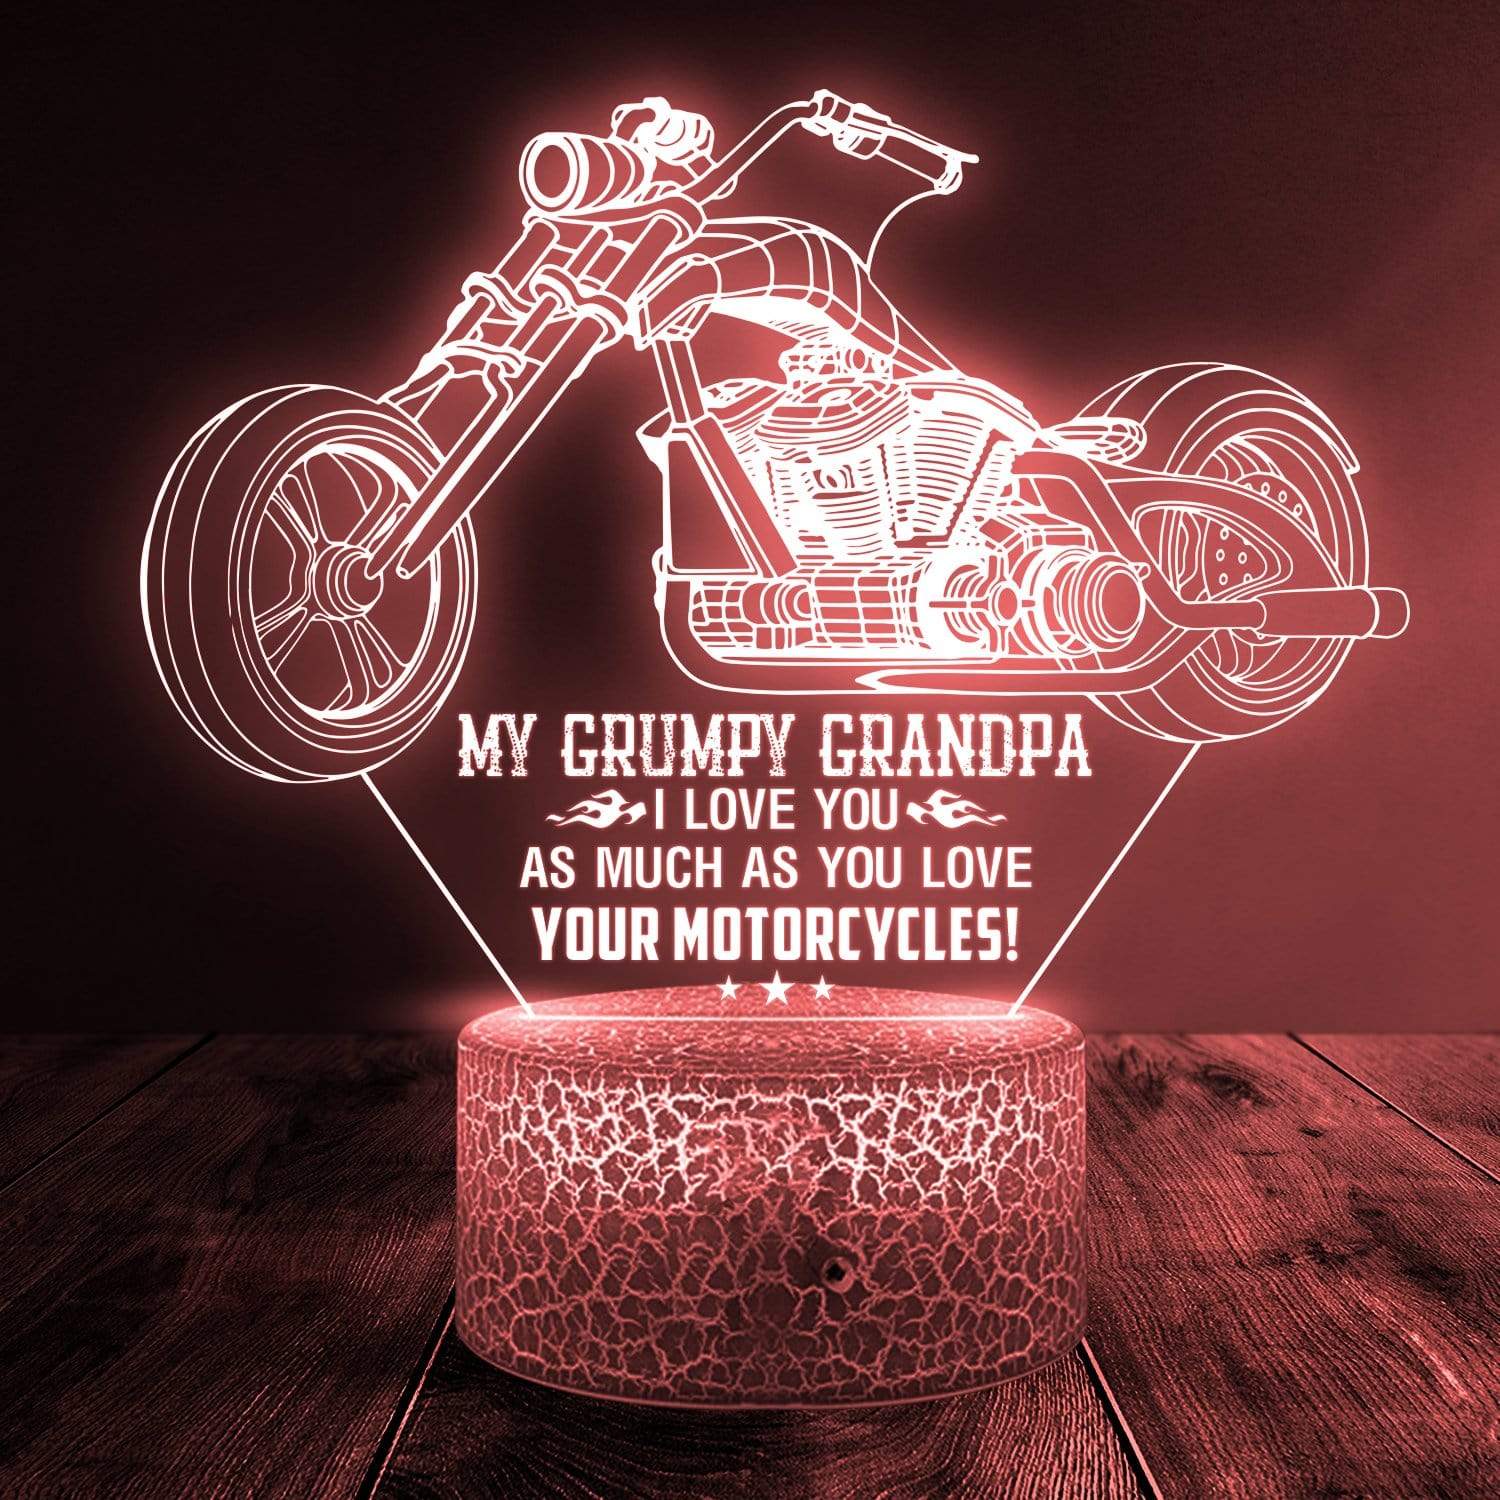 3D Led Light - Biker - My Grumpy Grandpa - I Love You As Much As You Love Your Motorcycles! - Glca20002